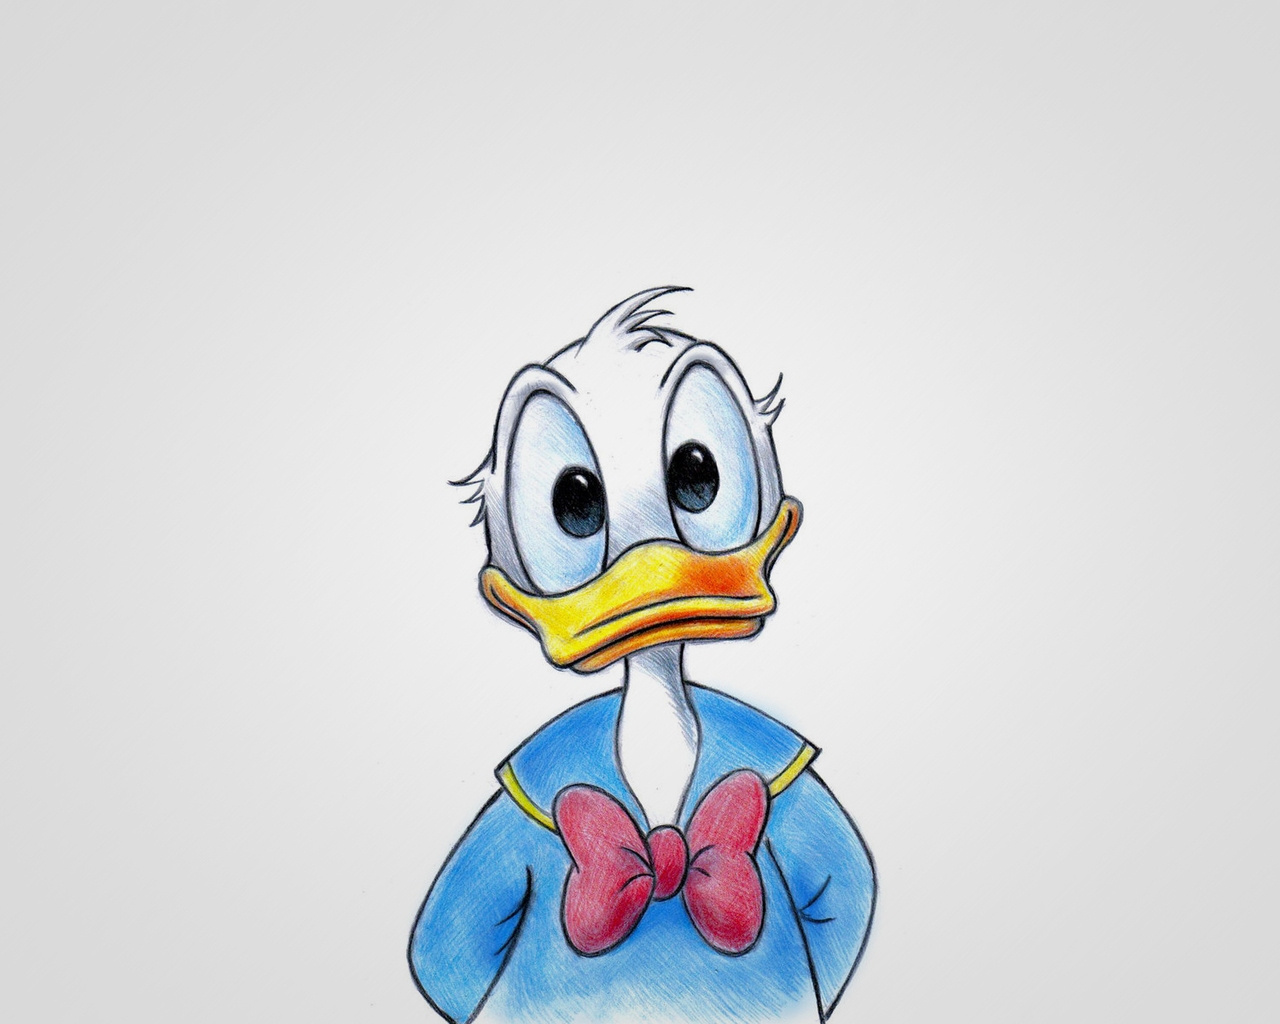 Donald Duck for 1280 x 1024 resolution